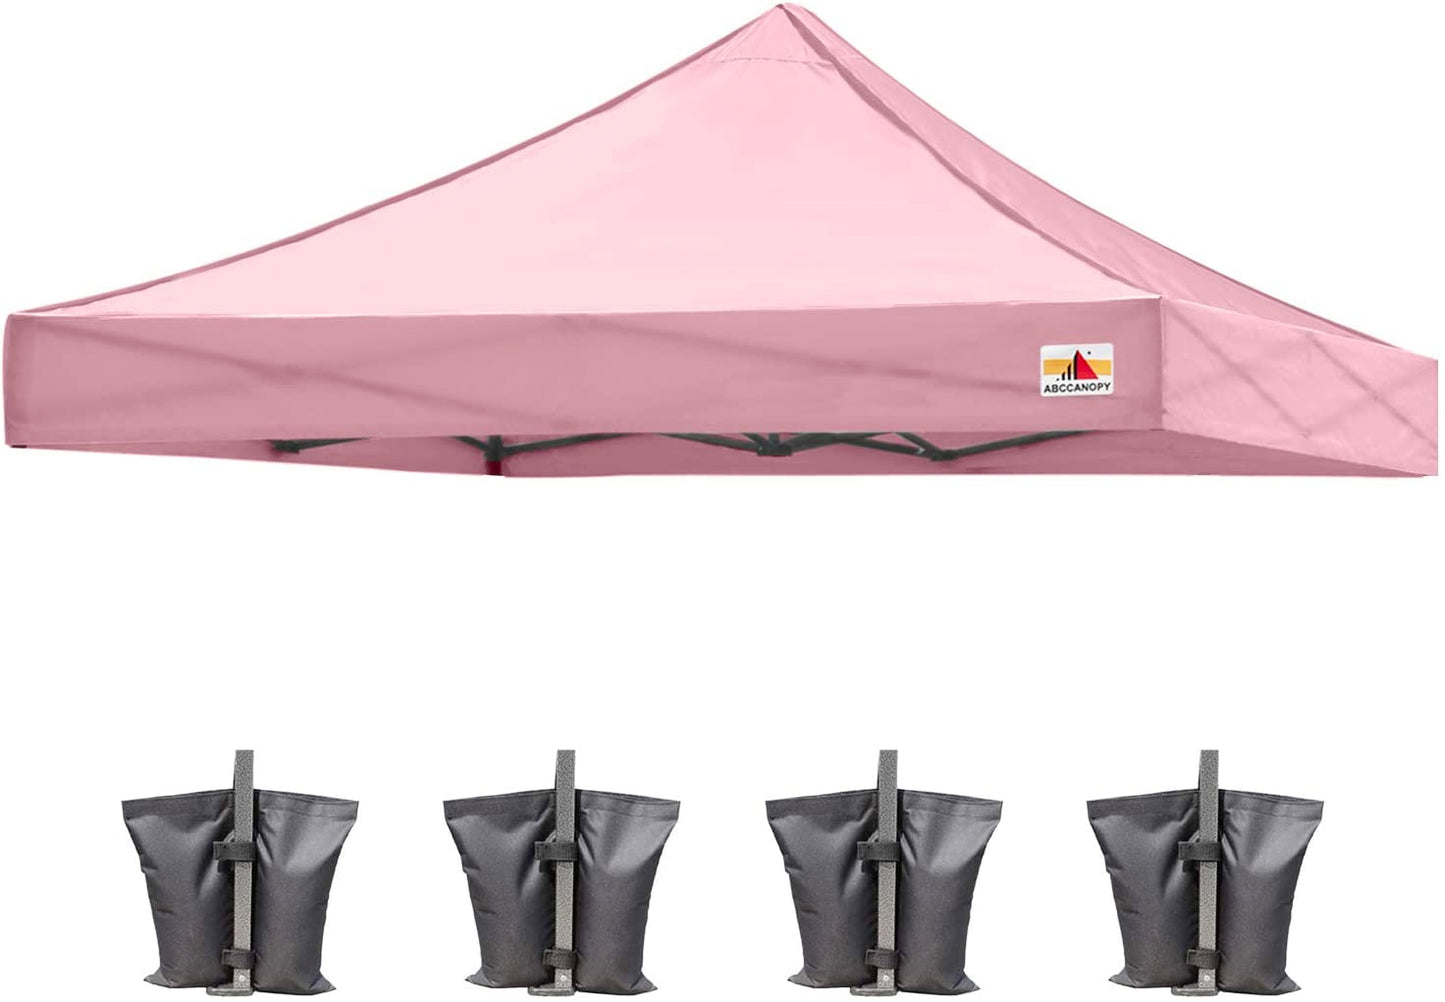 Here we have an image featuring the Pink Canopy TOP designed for the ABCCANOPY Commercial Deluxe 10x10 Canopy. Its clean and bright appearance enhances the overall ambiance of your outdoor space.